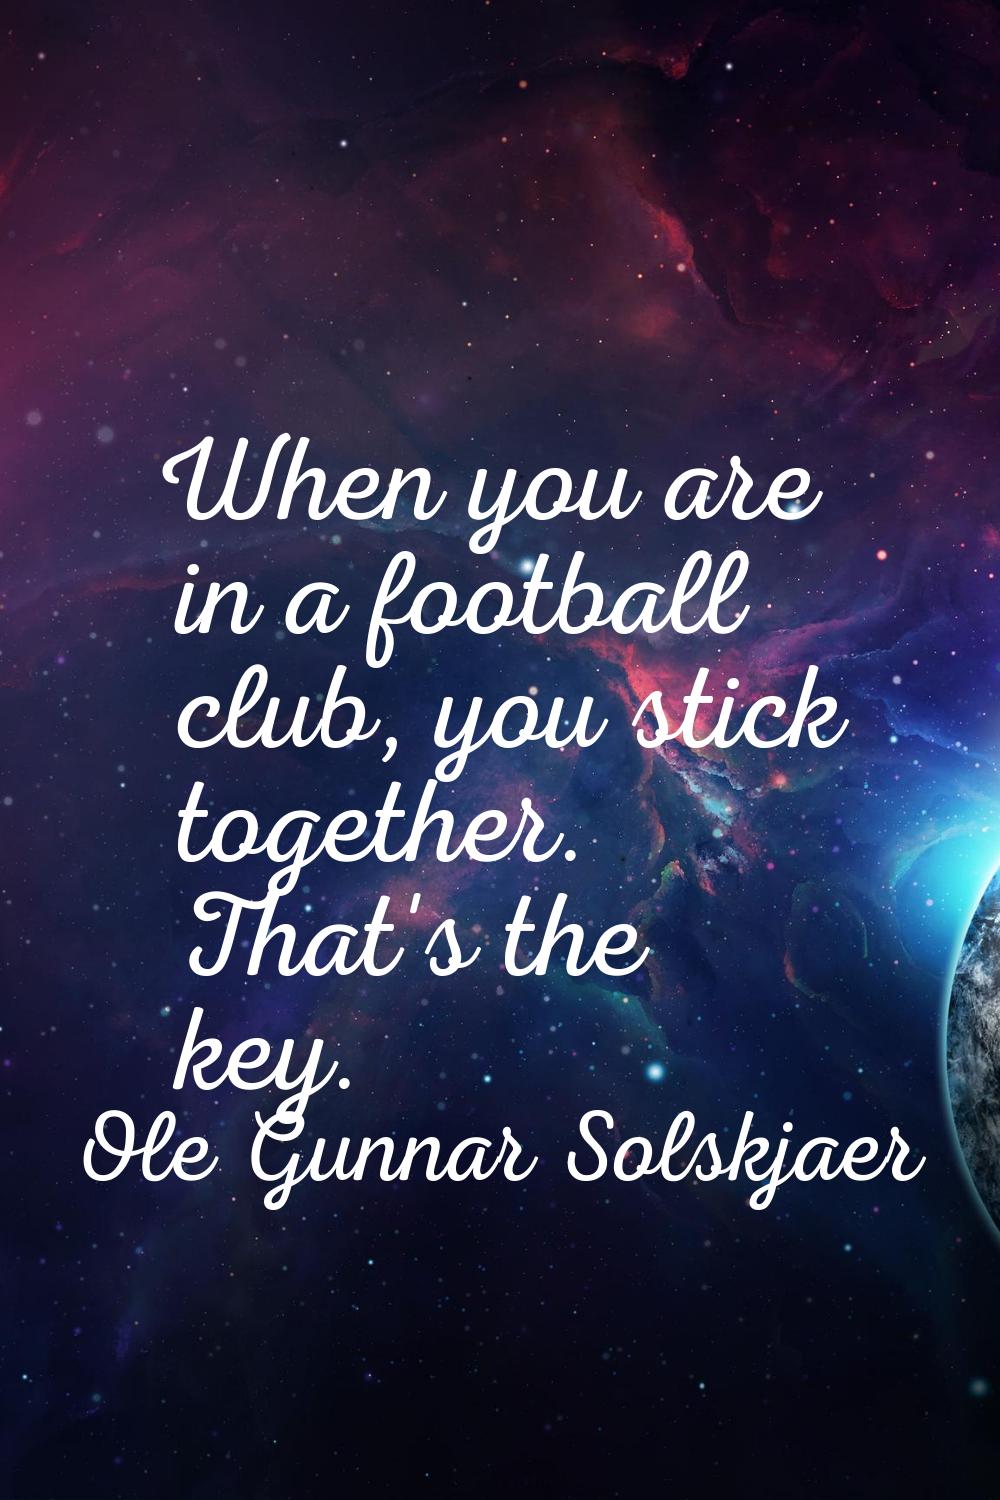 When you are in a football club, you stick together. That's the key.